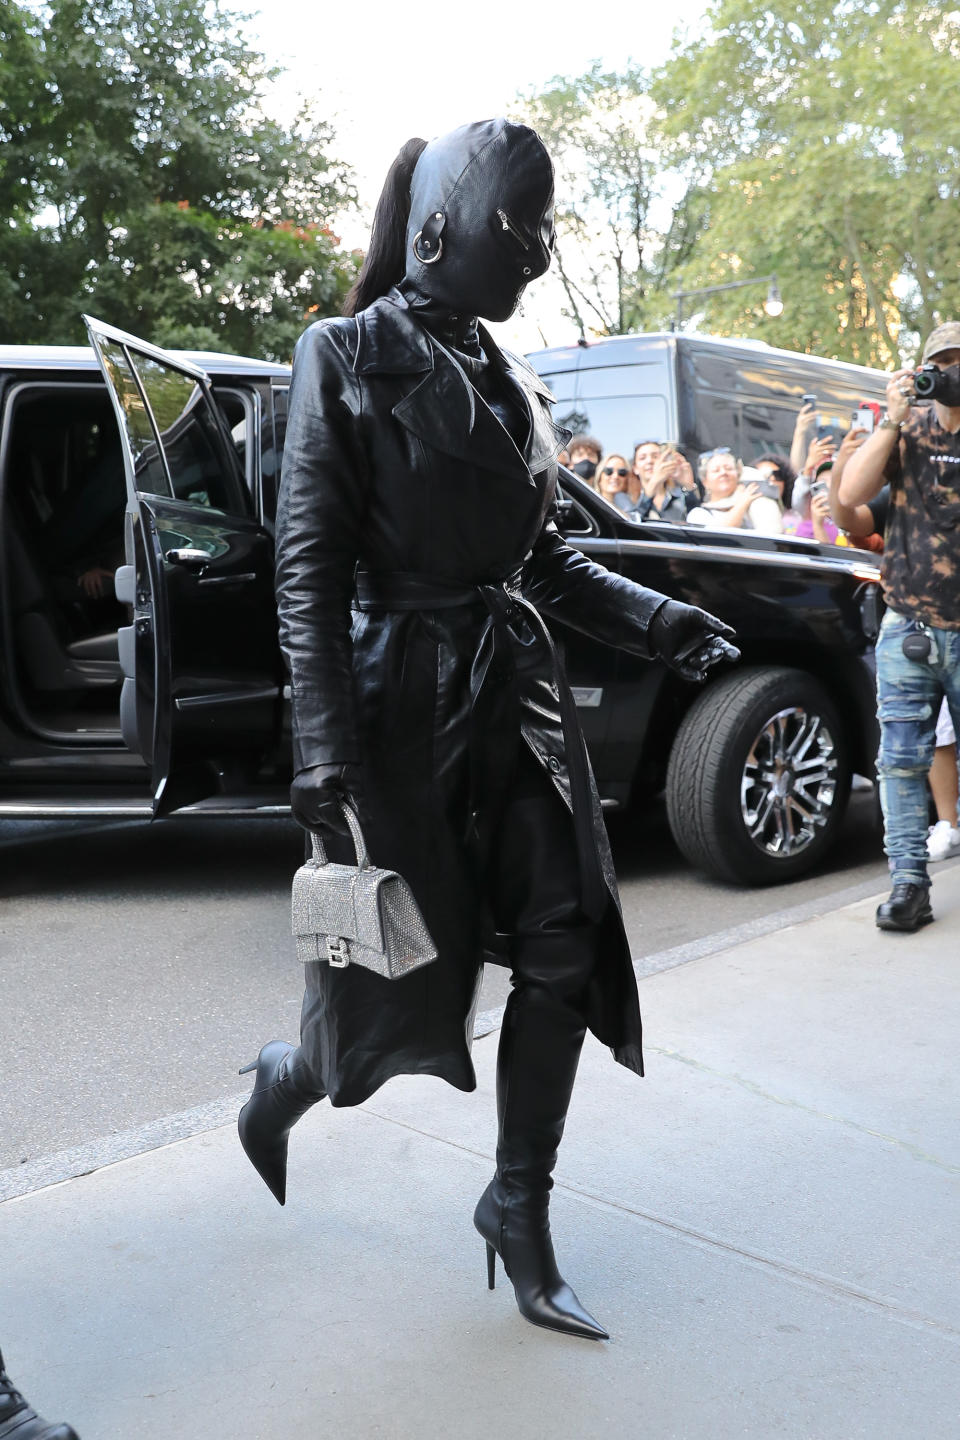 Kim Kardashian covered head-to-toe with a leather suit arrives at her hotel in NYC on Sept. 11, 2021. - Credit: MEGA